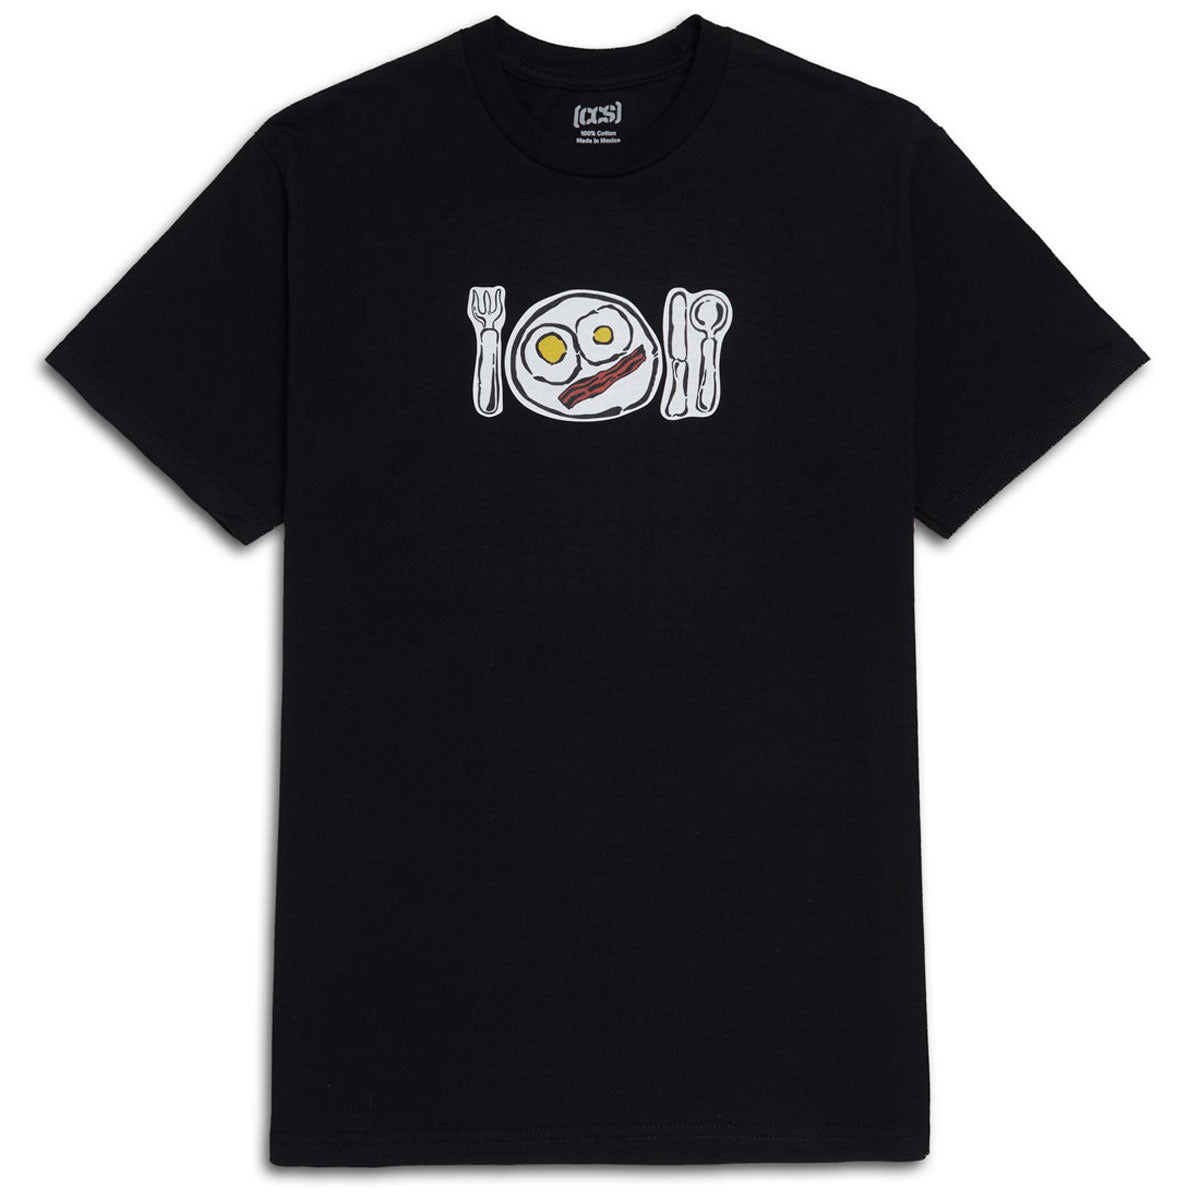 CCS Over Easy T-Shirt - Black image 1